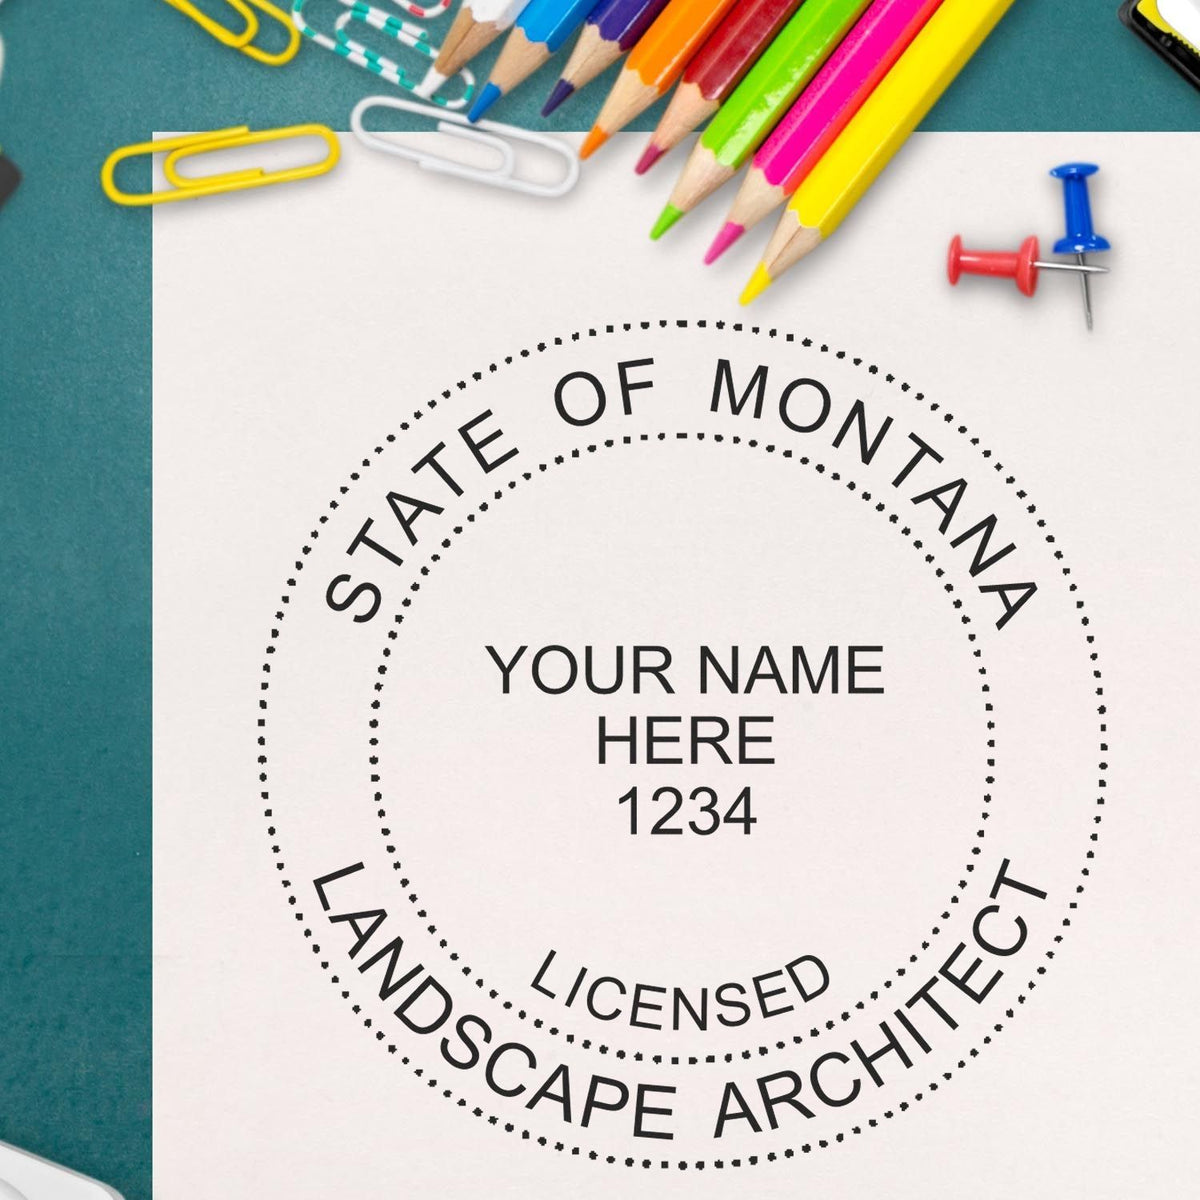 A stamped impression of the Self-Inking Montana Landscape Architect Stamp in this stylish lifestyle photo, setting the tone for a unique and personalized product.